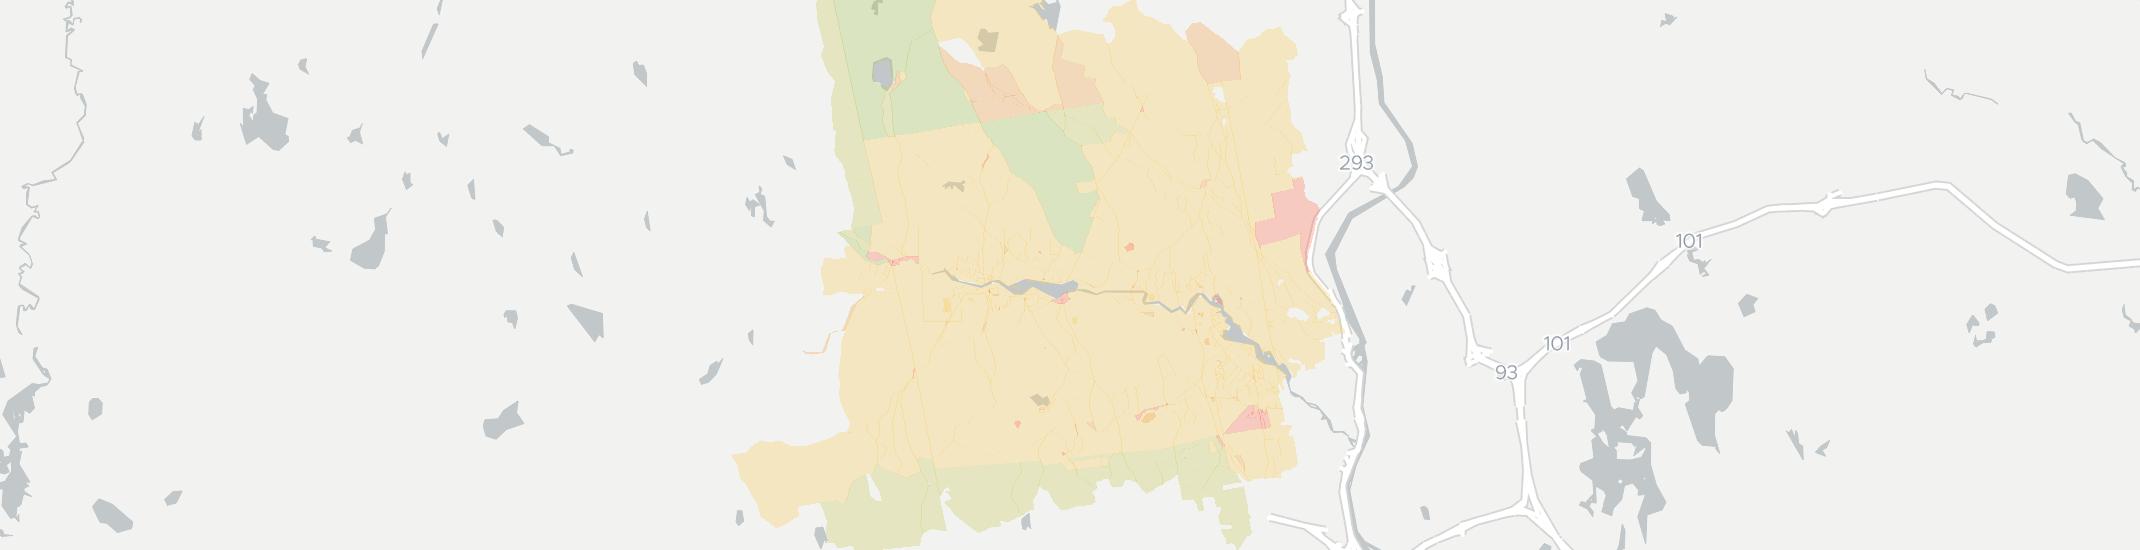 Goffstown Internet Competition Map. Click for interactive map.